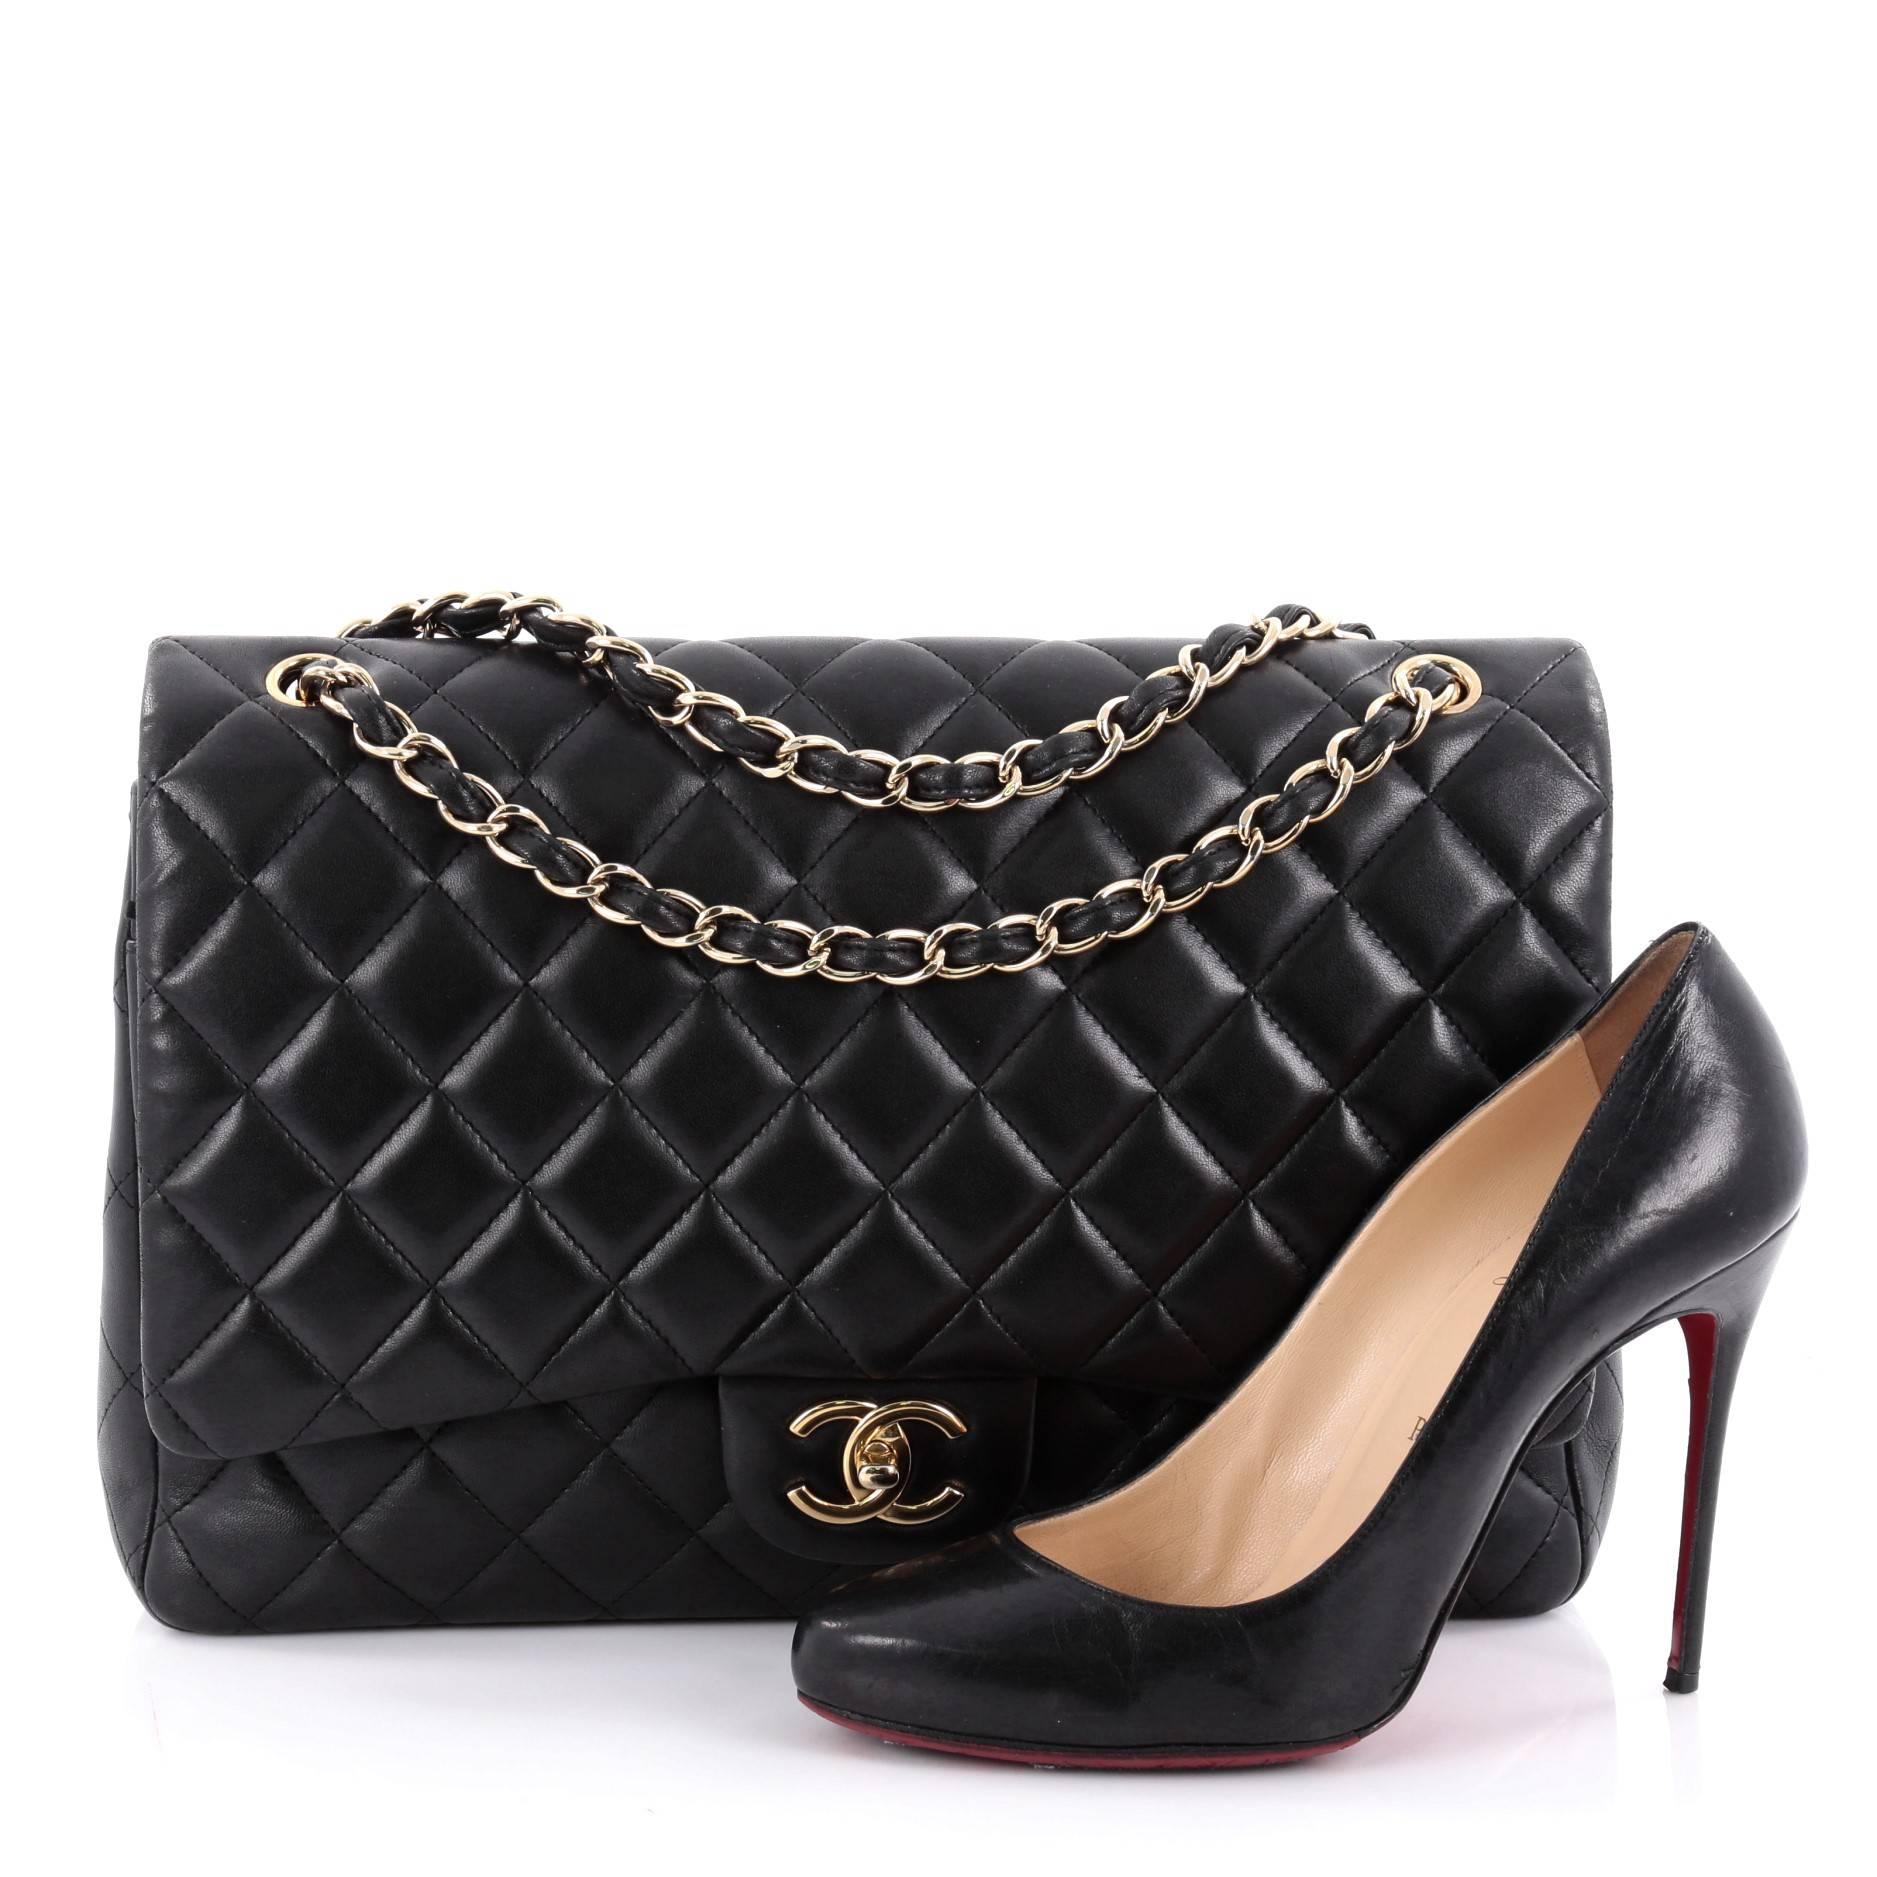 This authentic Chanel Classic Double Flap Bag Quilted Lambskin Maxi exudes a classic yet easy style made for the modern woman. Crafted from black lambskin leather, this elegant flap features Chanel's signature diamond quilted design, woven-in